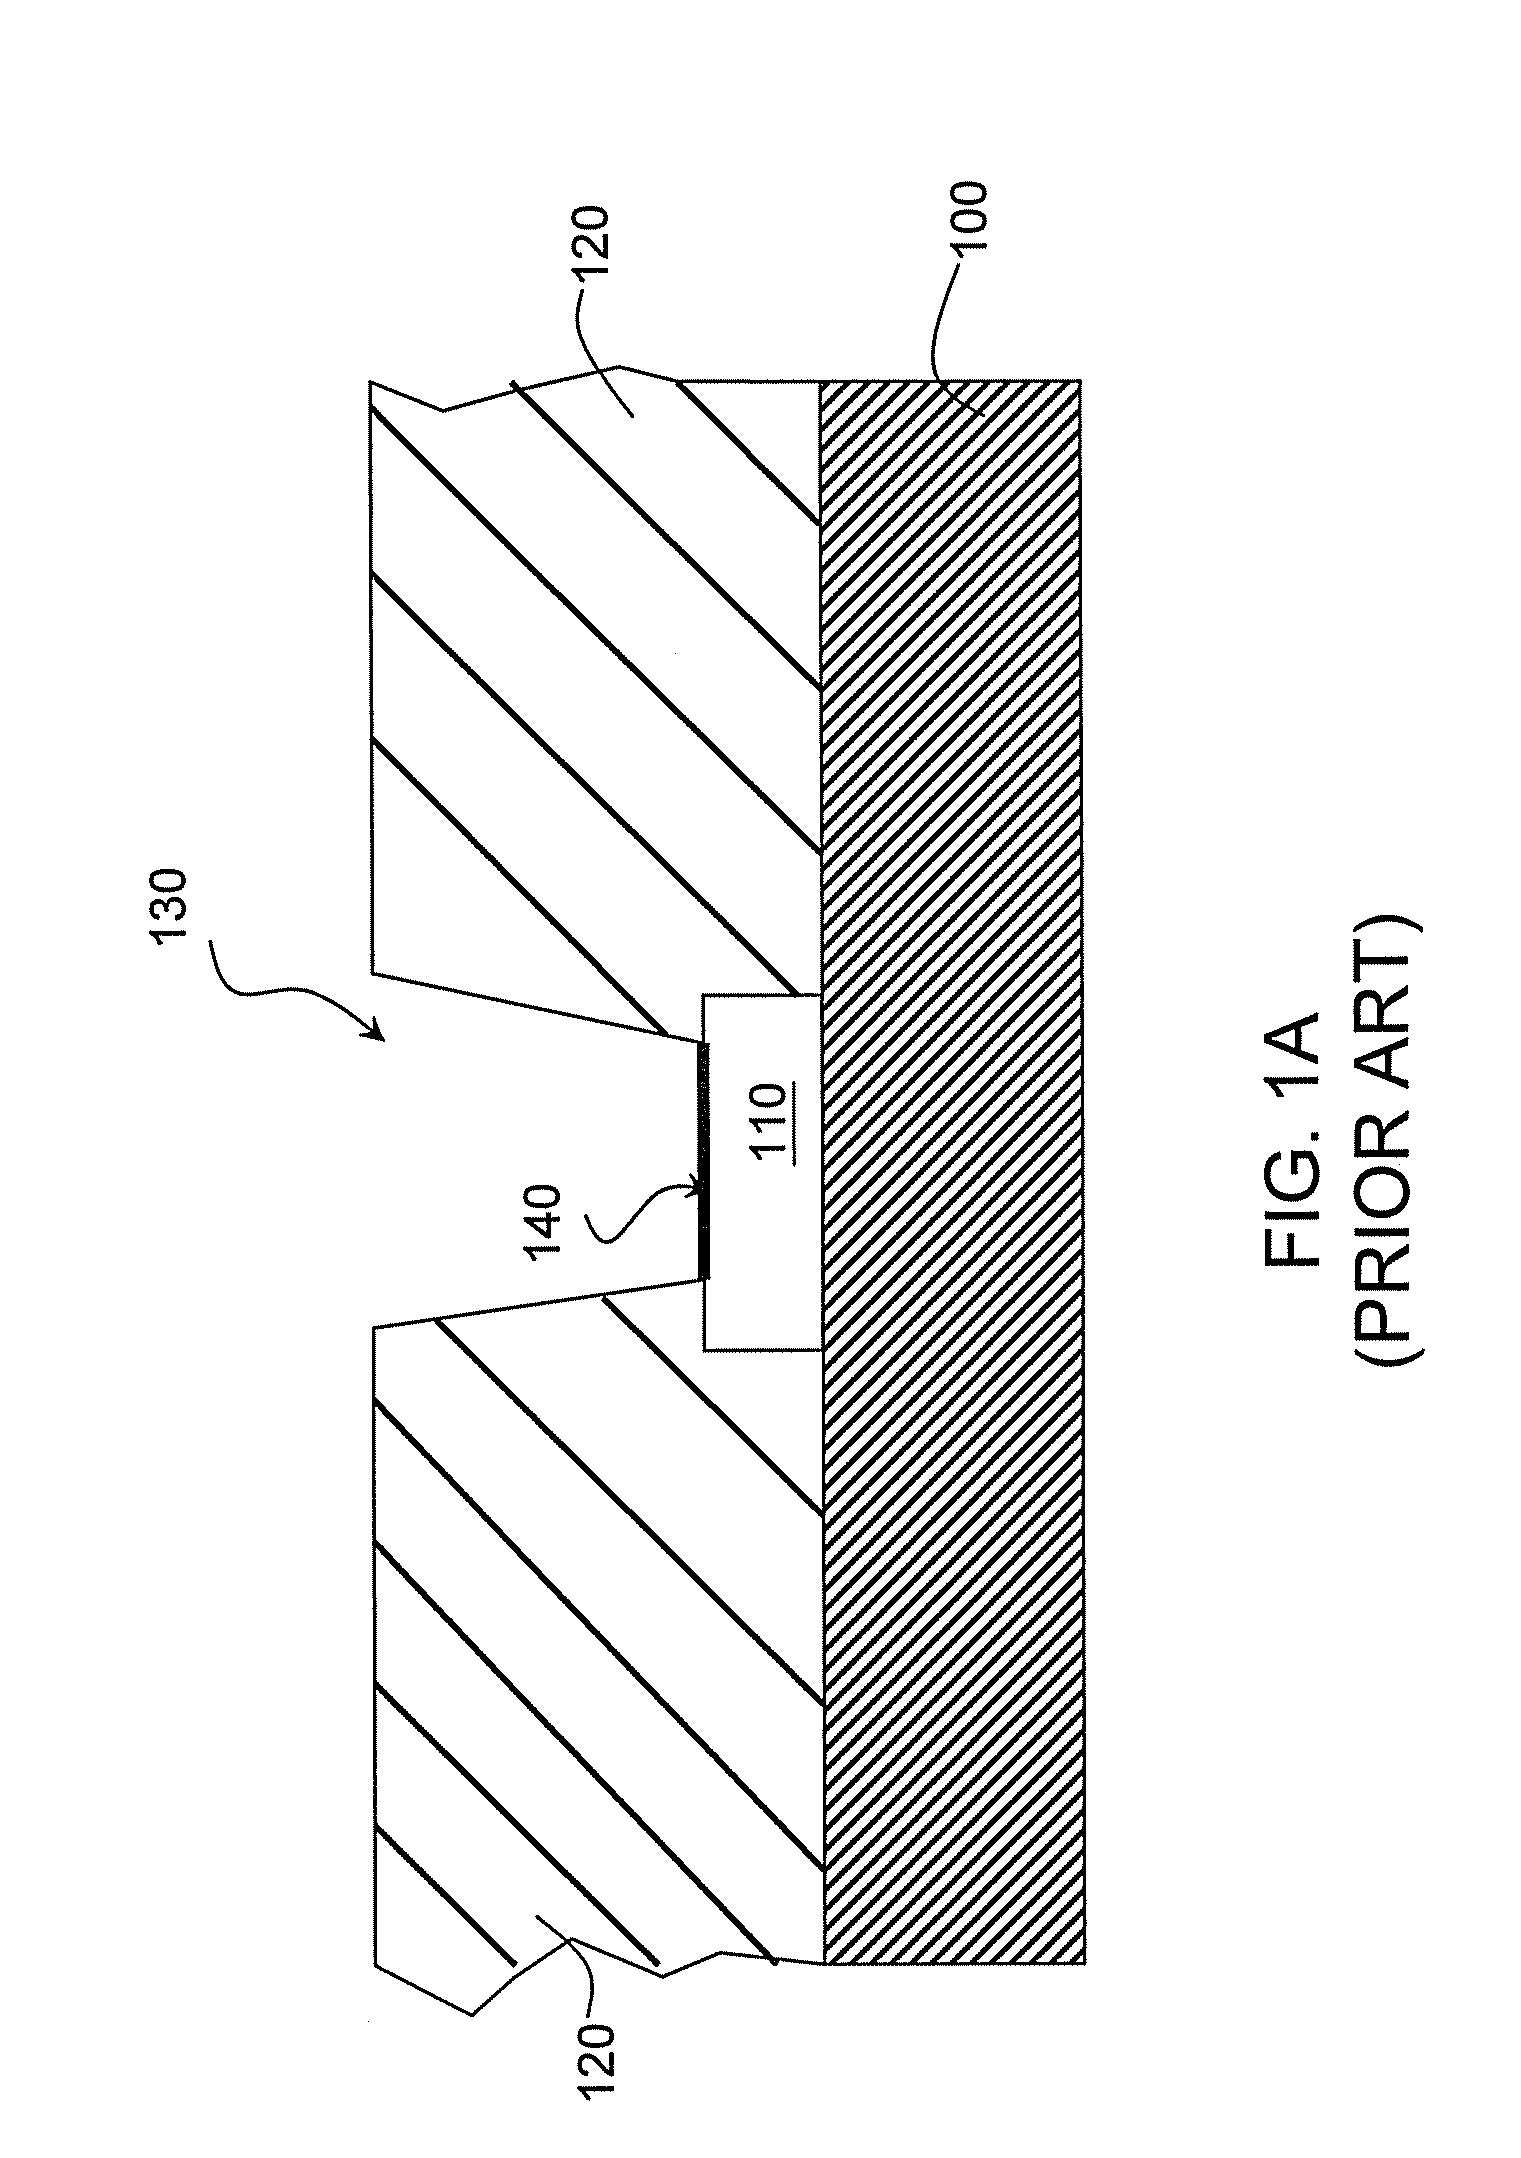 Substrate carrier, port apparatus and facility interface and apparatus including same